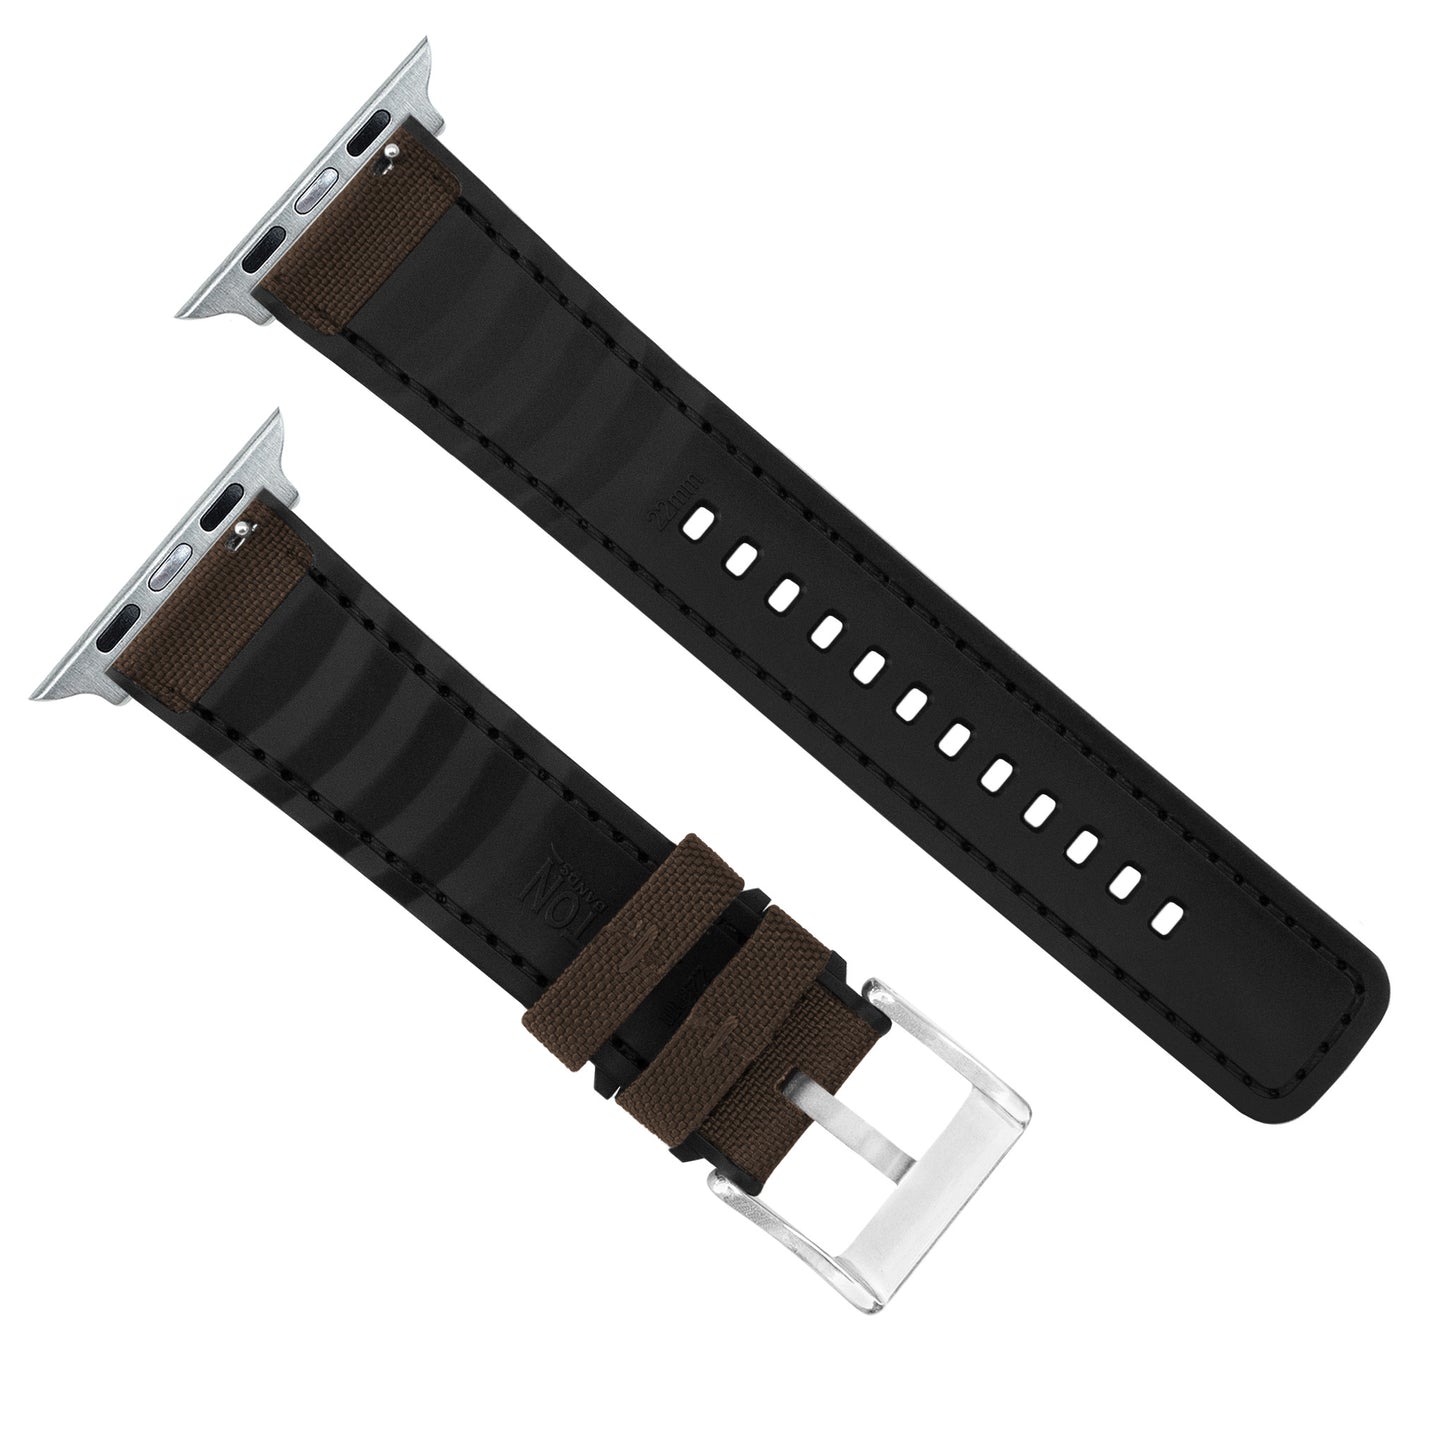 Apple Watch | Chocolate Brown Cordura Fabric and Silicone Hybrid - Barton Watch Bands